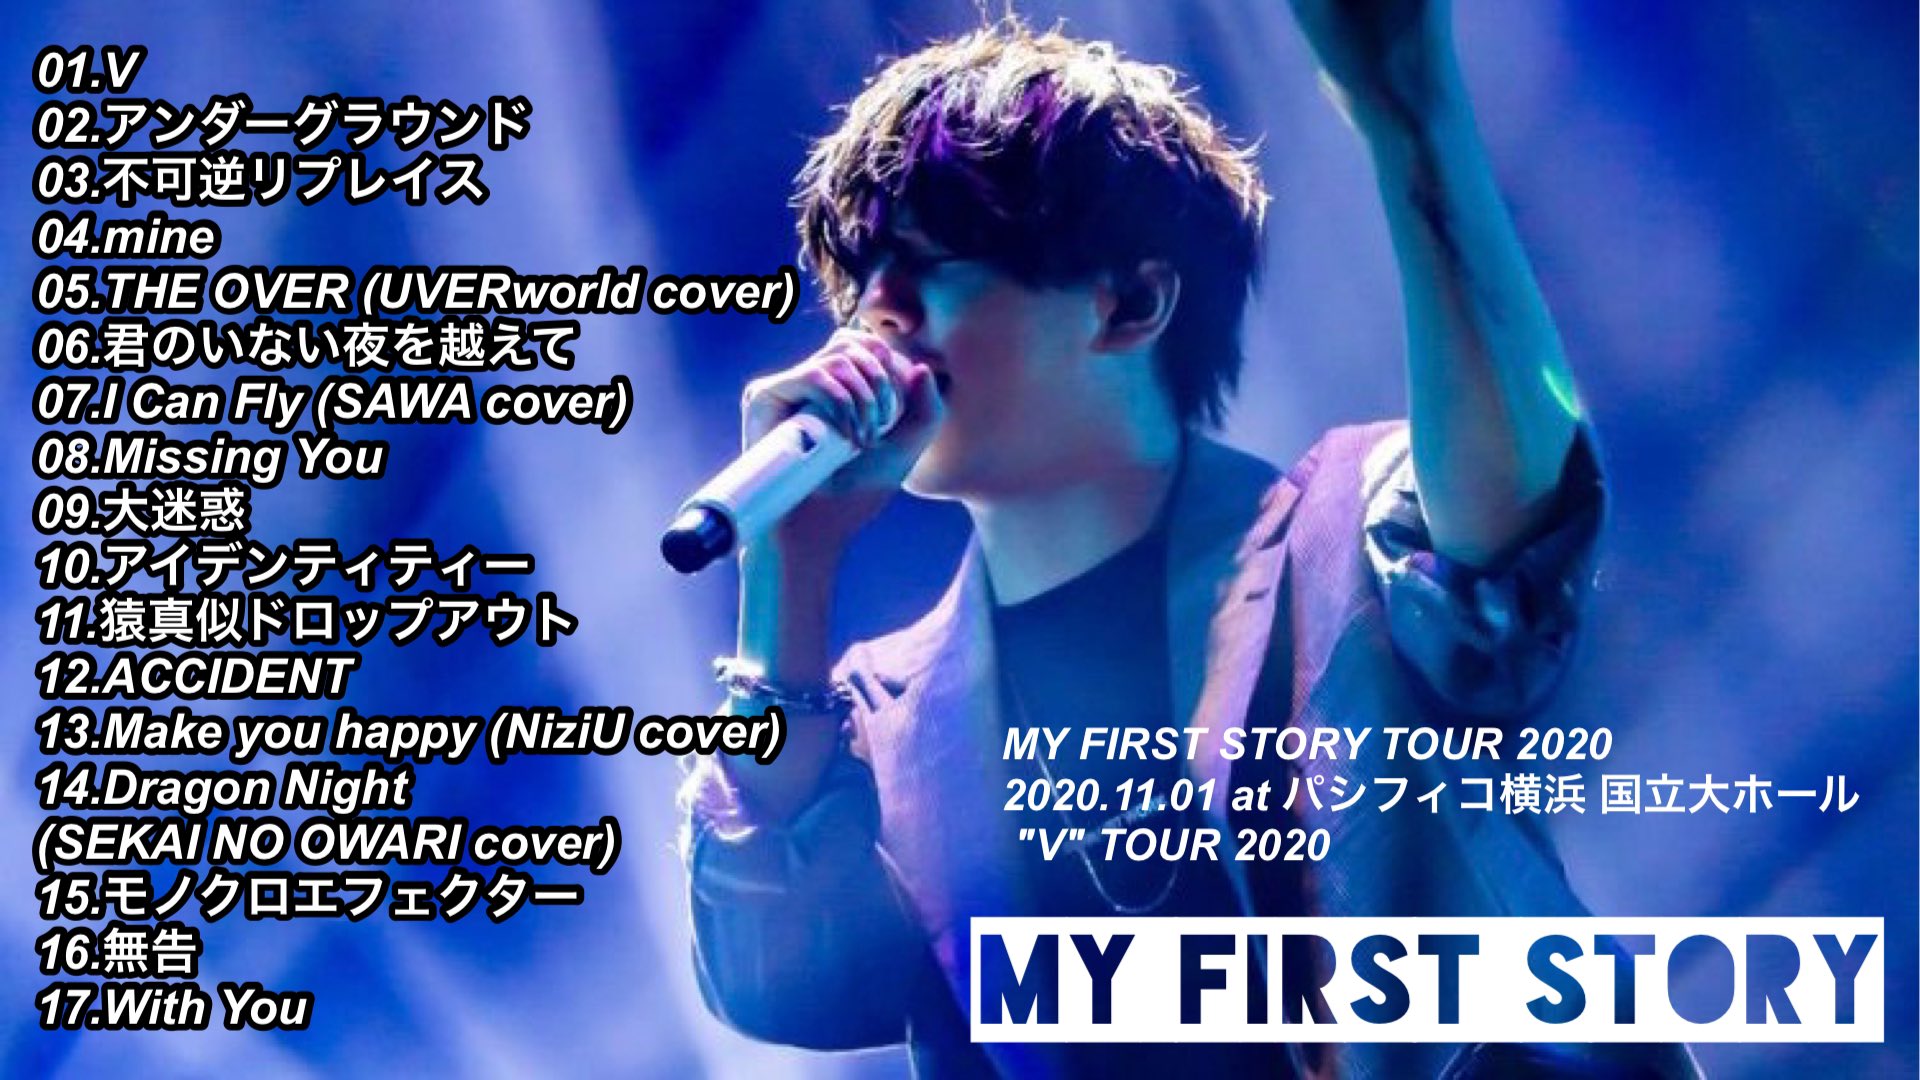 MY FIRST STORY TOUR 2020 パシフィコ横浜公演 DVD - ミュージック